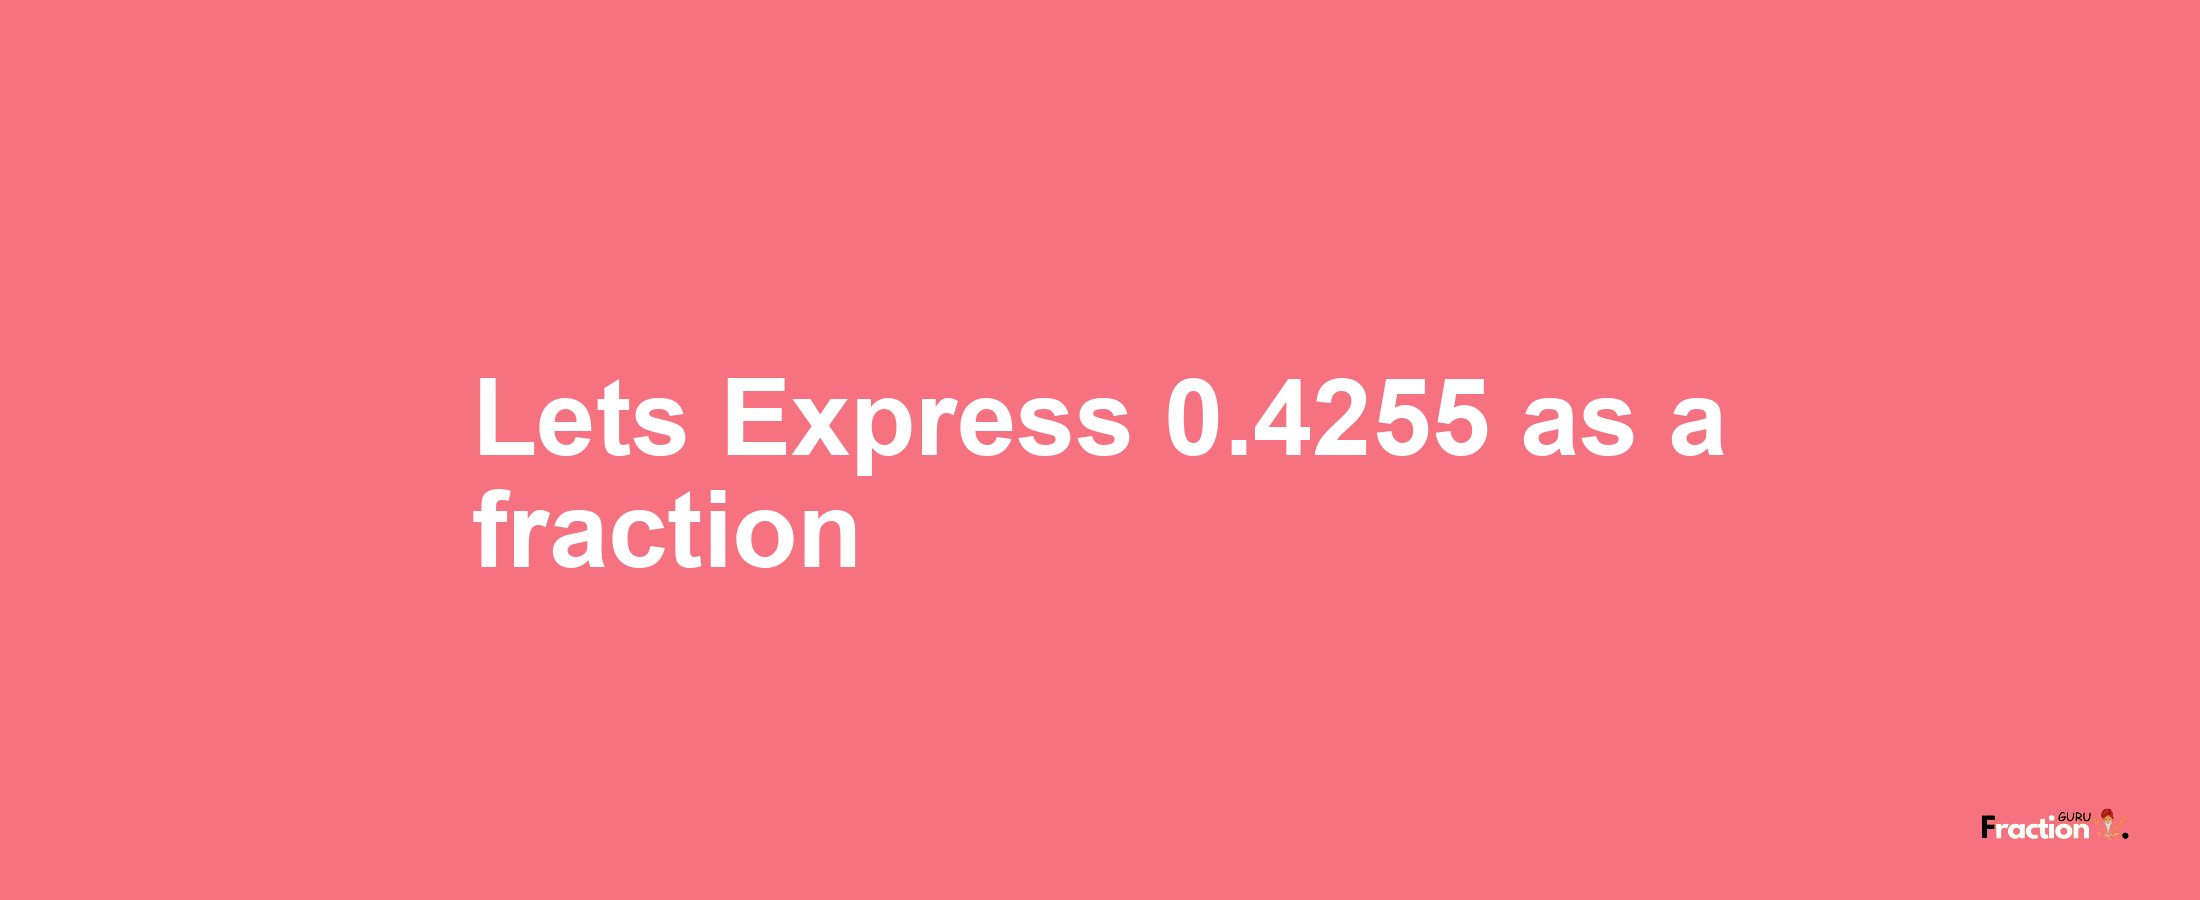 Lets Express 0.4255 as afraction